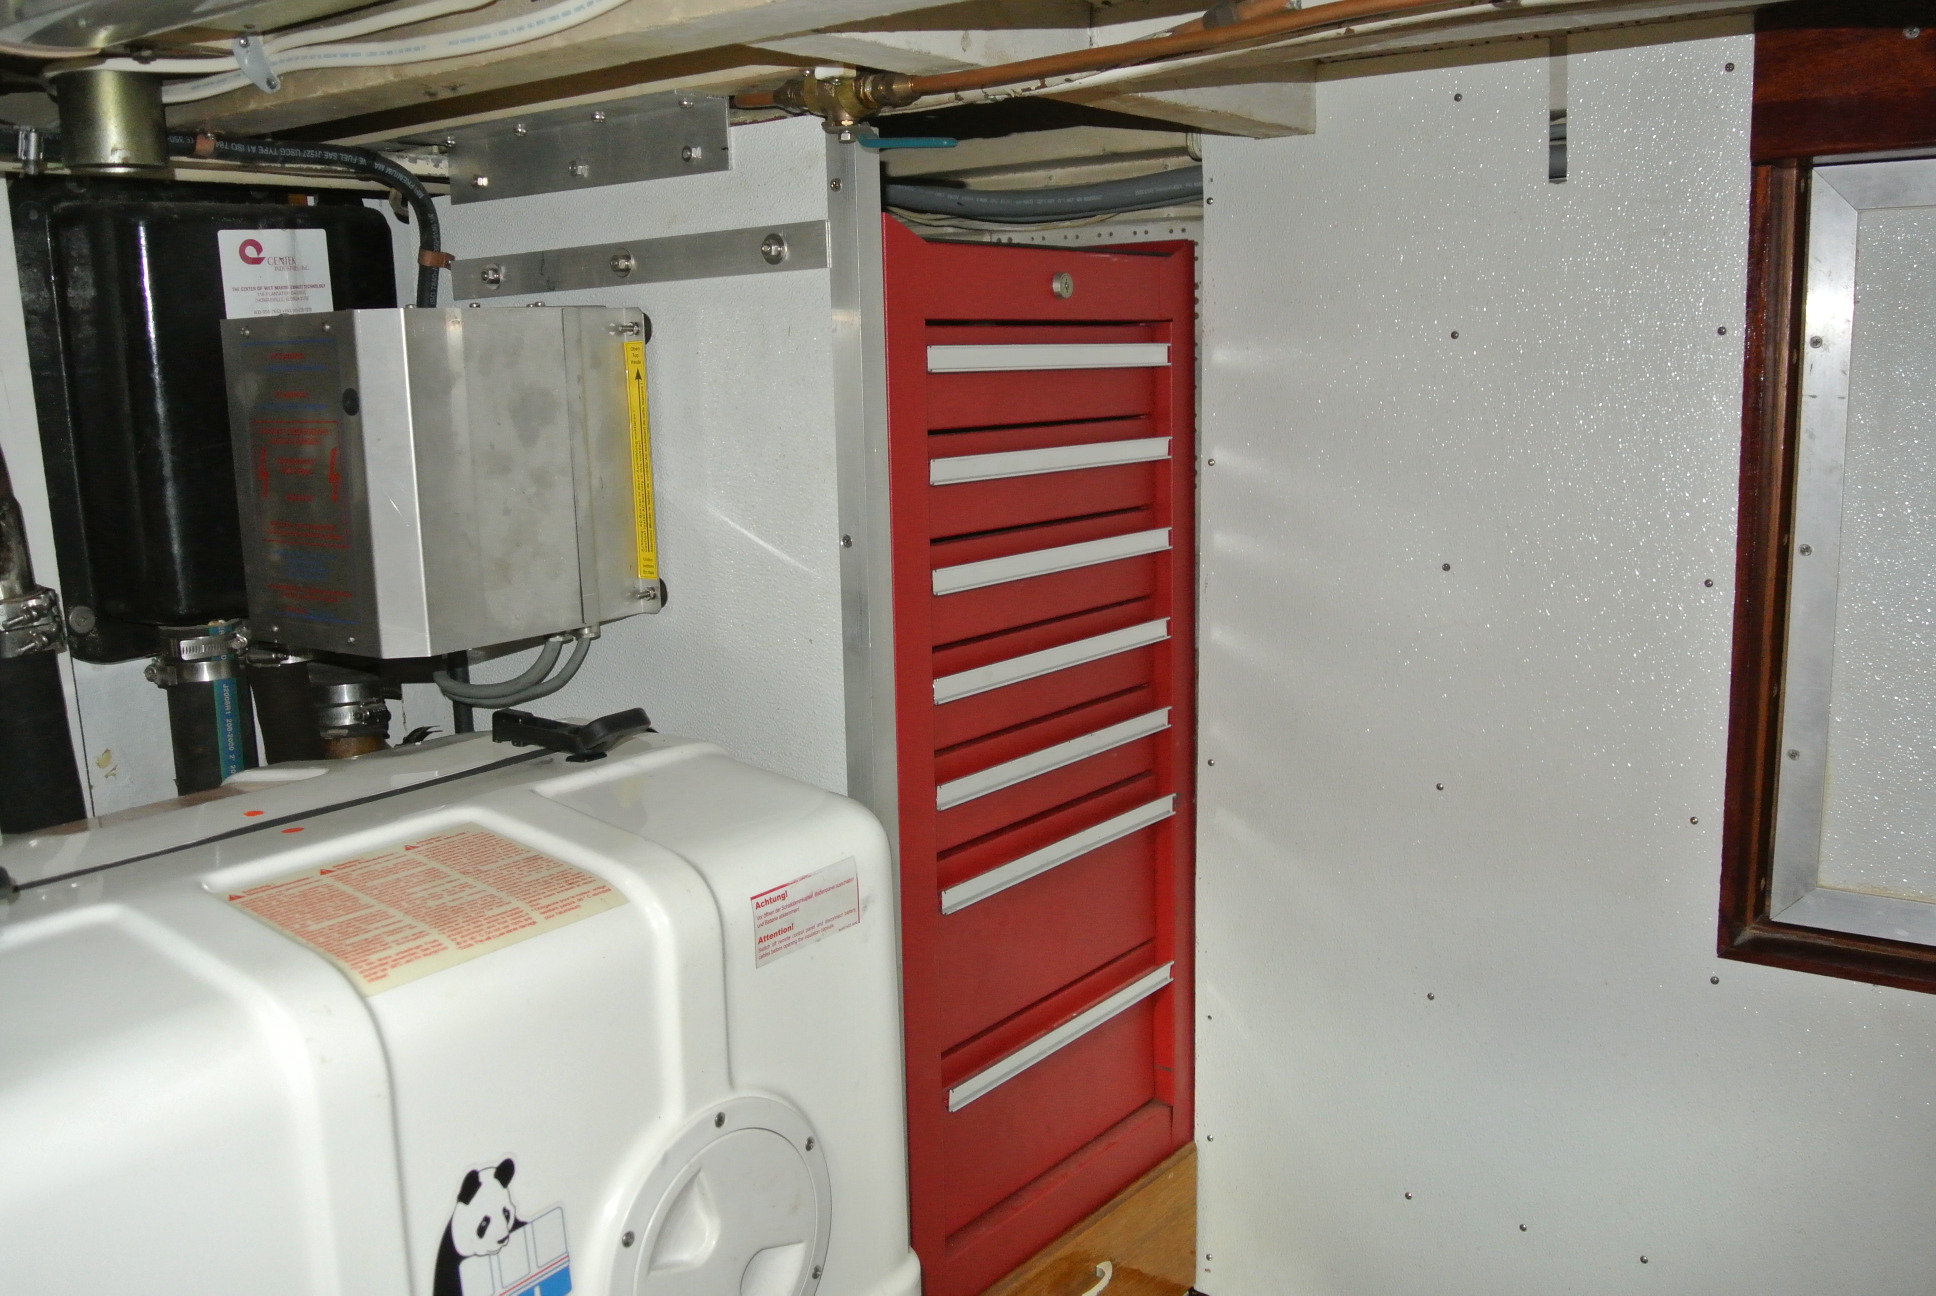 Port forward side of the engine room with tool box storage, and partial view of the new 8kw Generator.